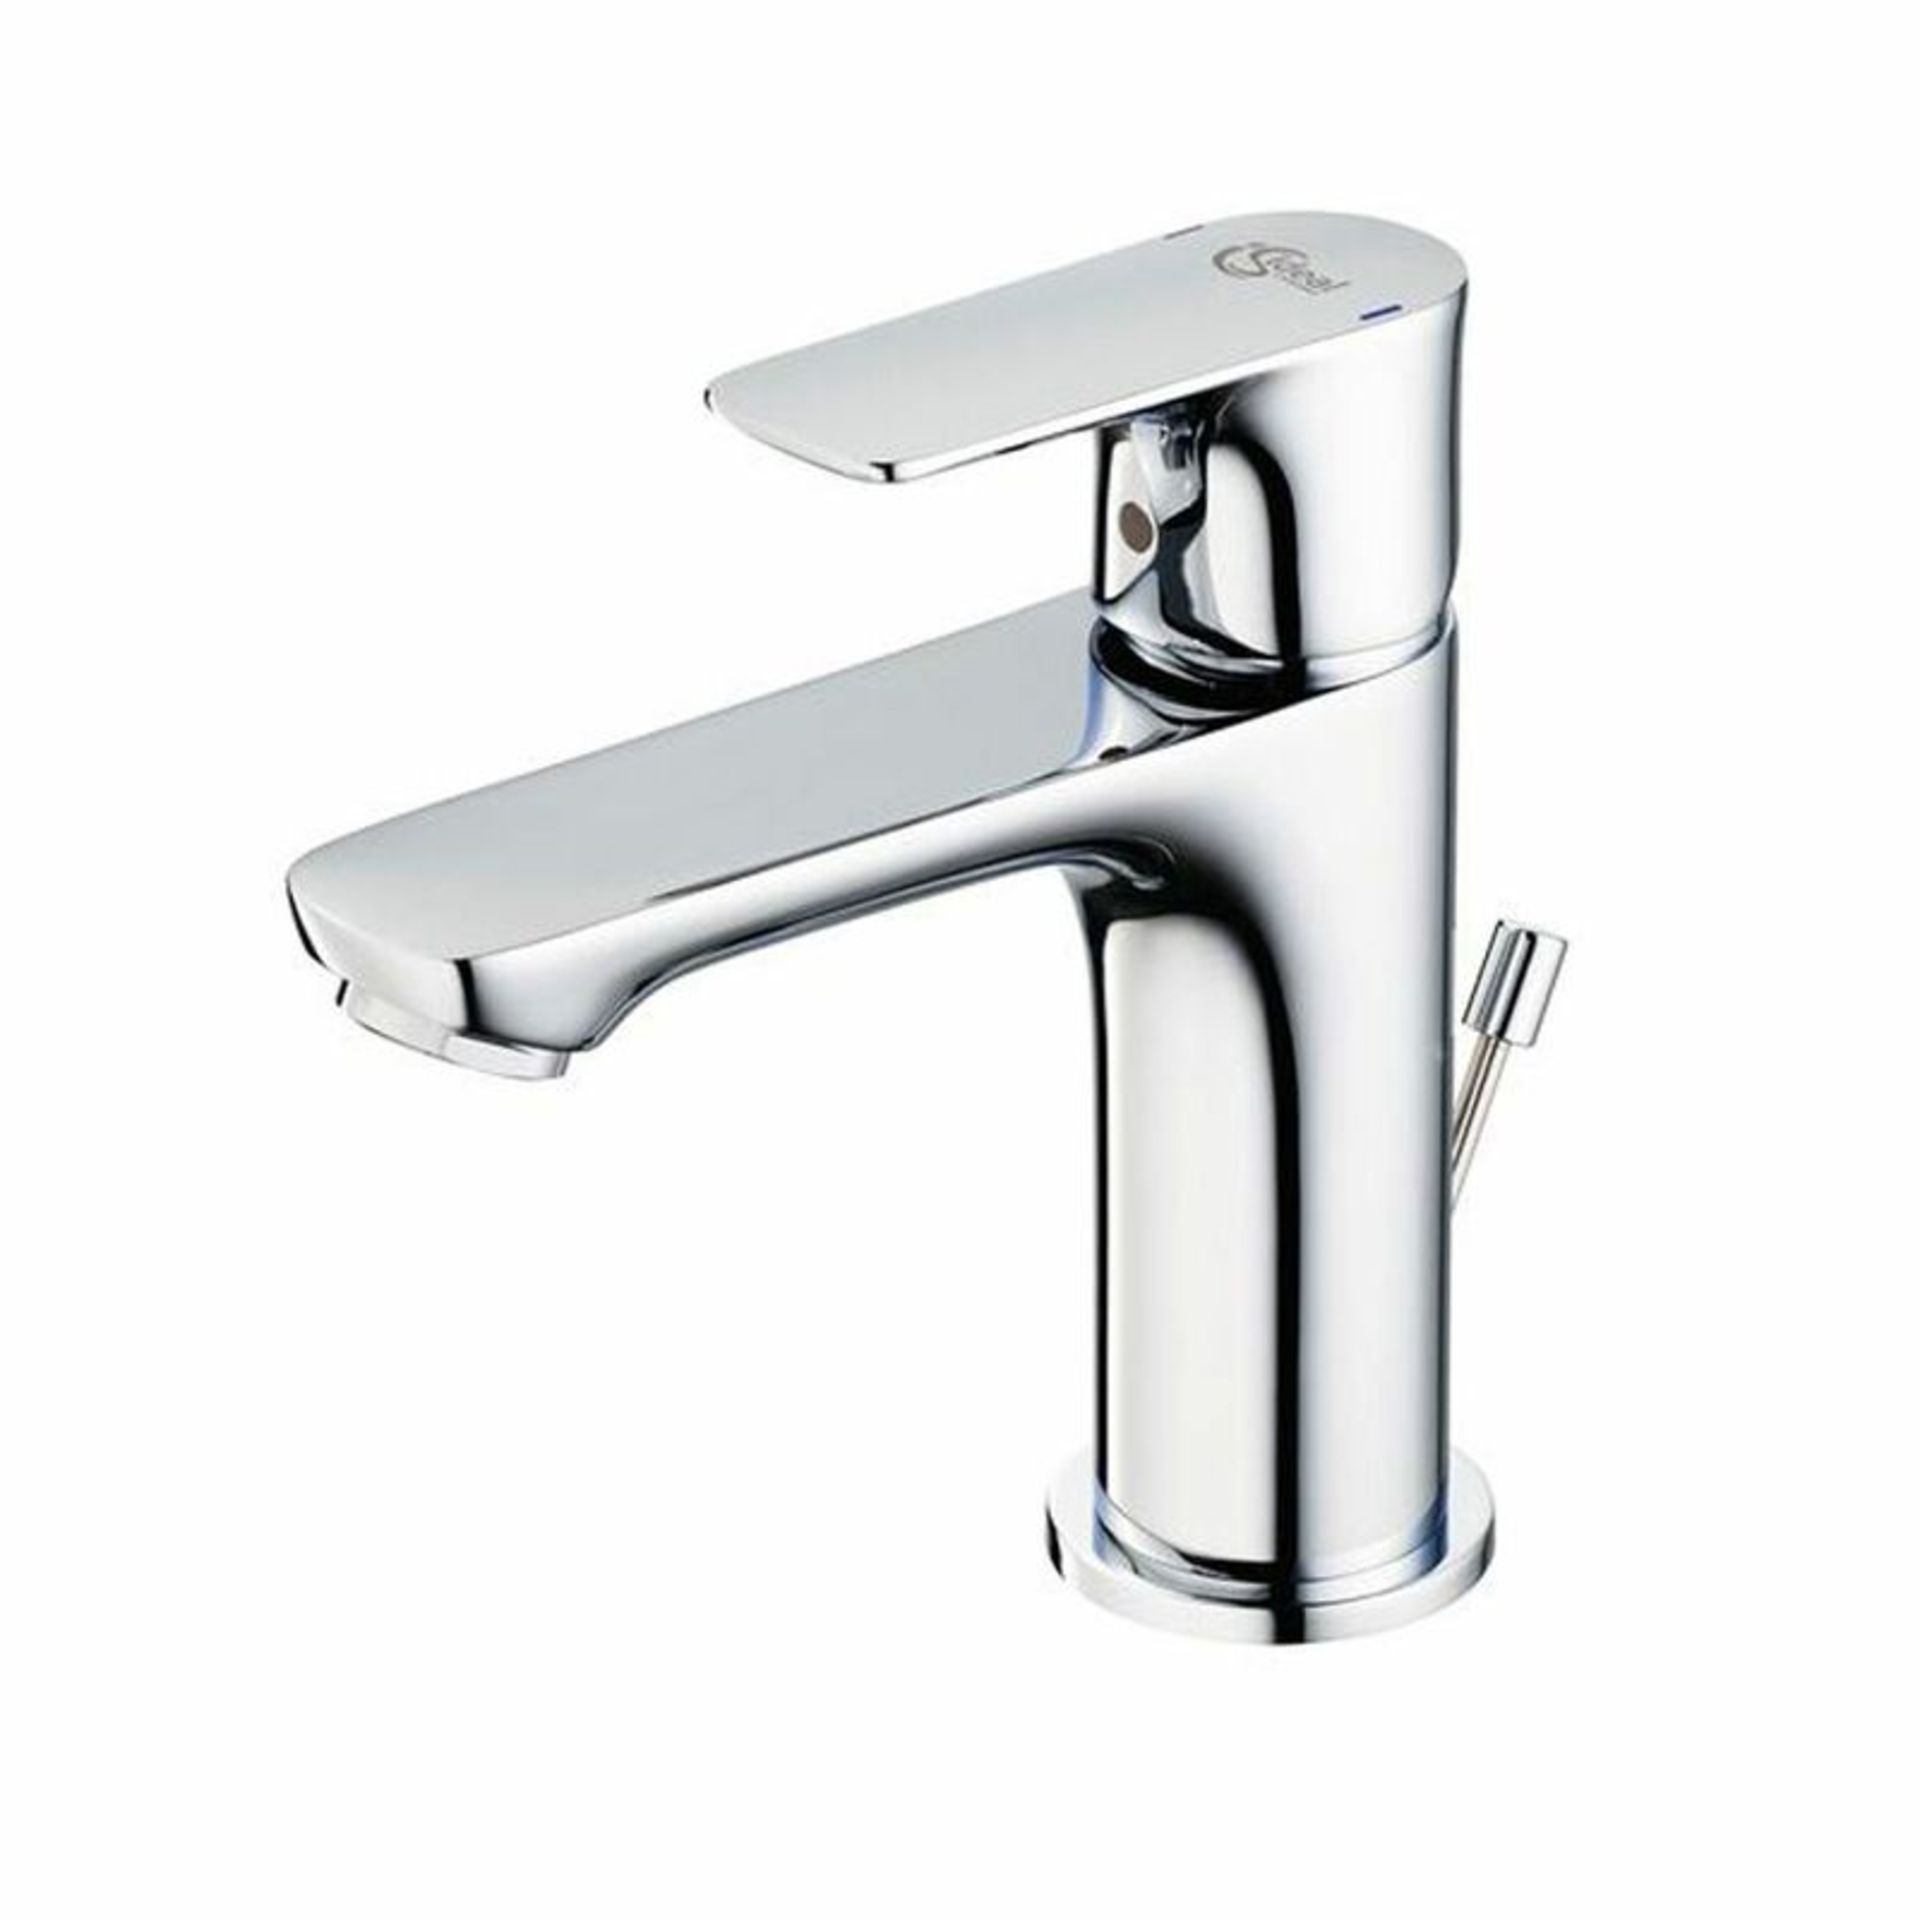 1 x Ideal Standard Concept Air Slim Style Chrome Basin Mixer Tap - New Boxed Stock - RRP £169